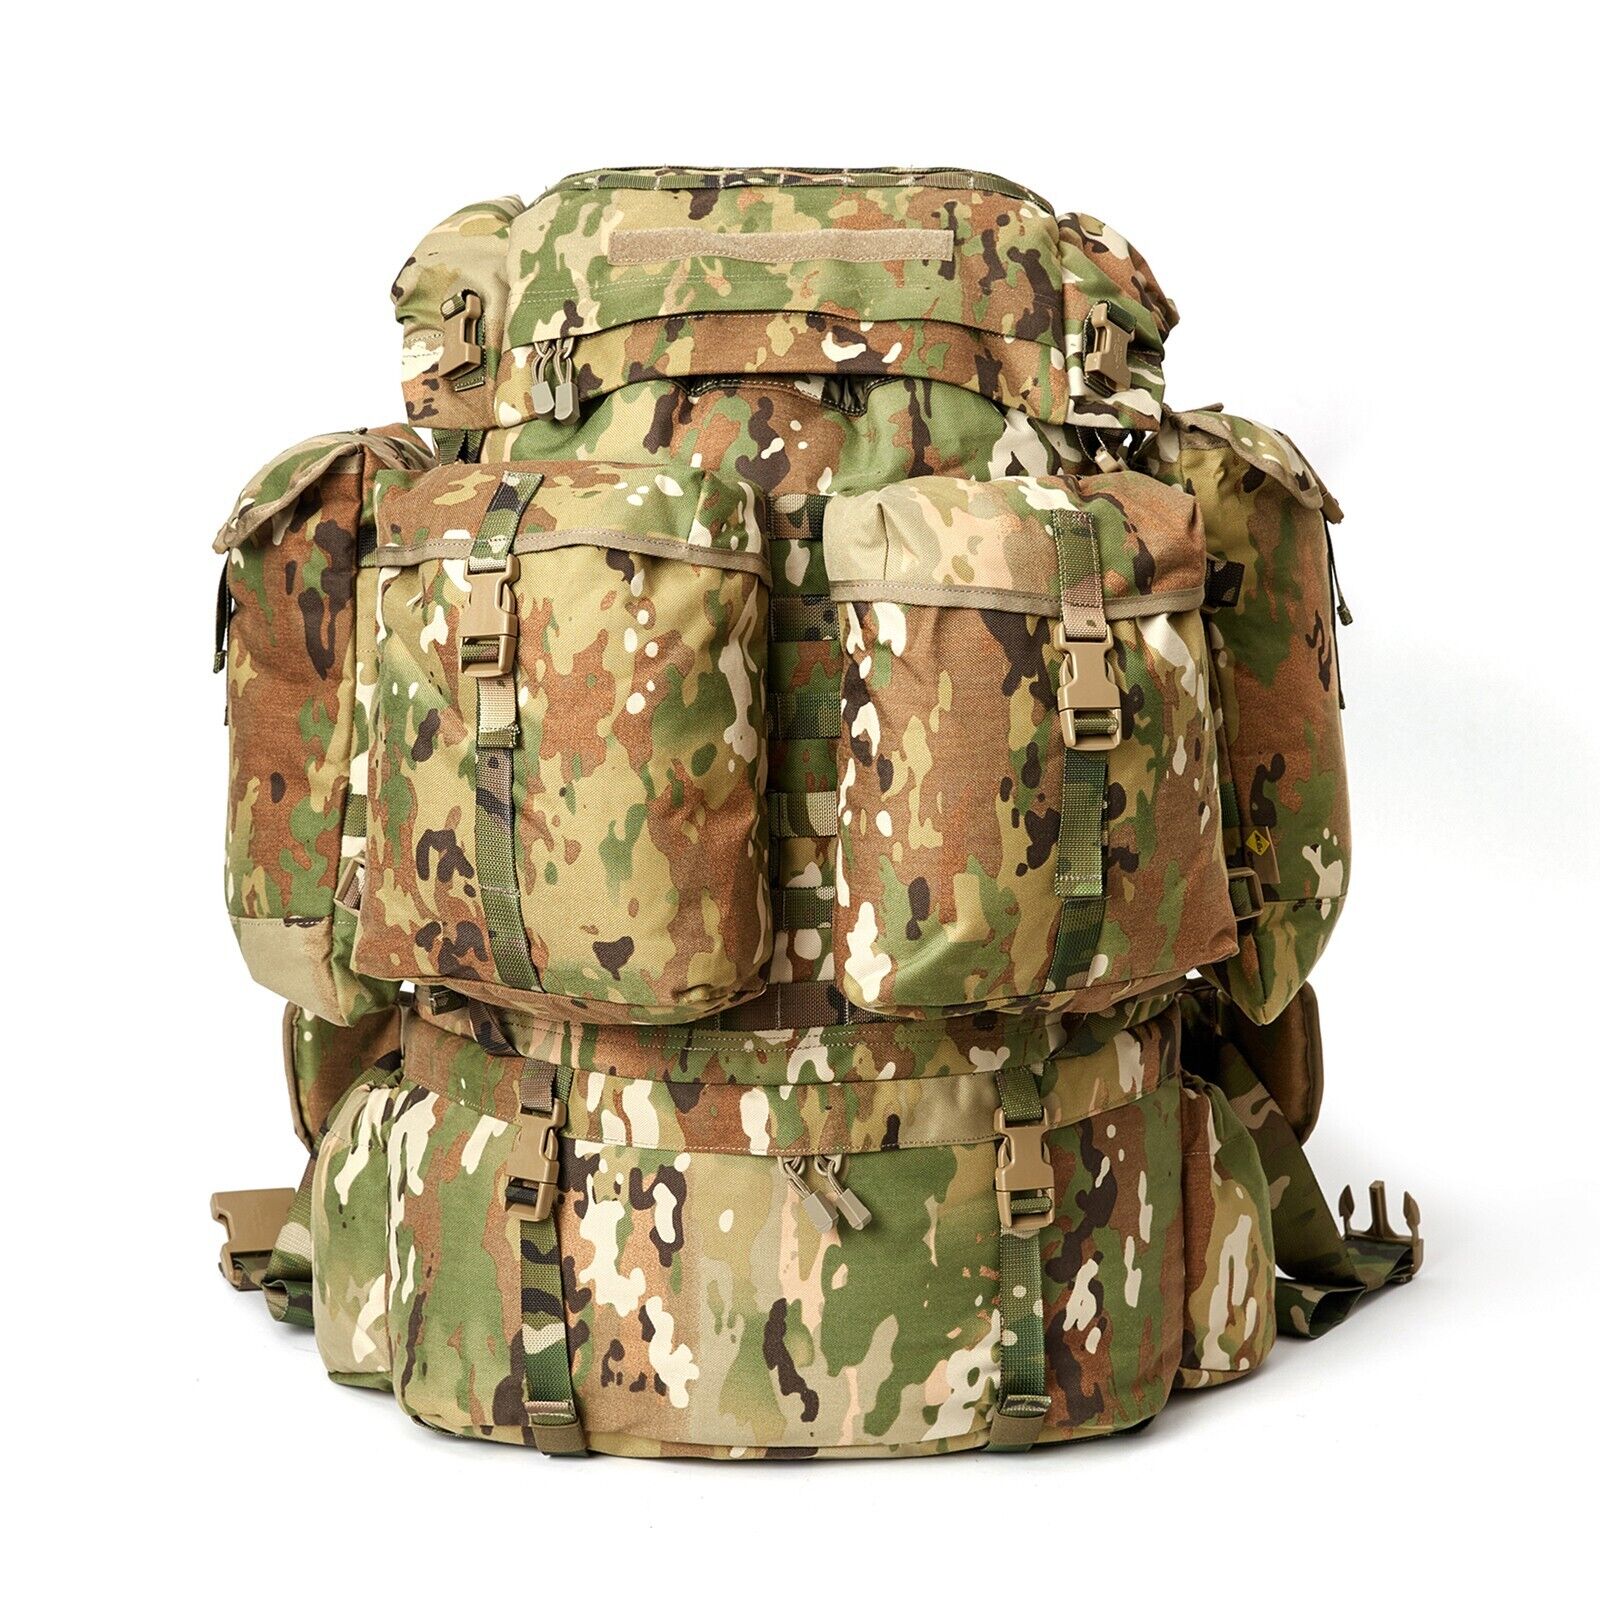 MT Assembly Military FILBE Rucksack Tactical Assault Backpack Main Pack OCP